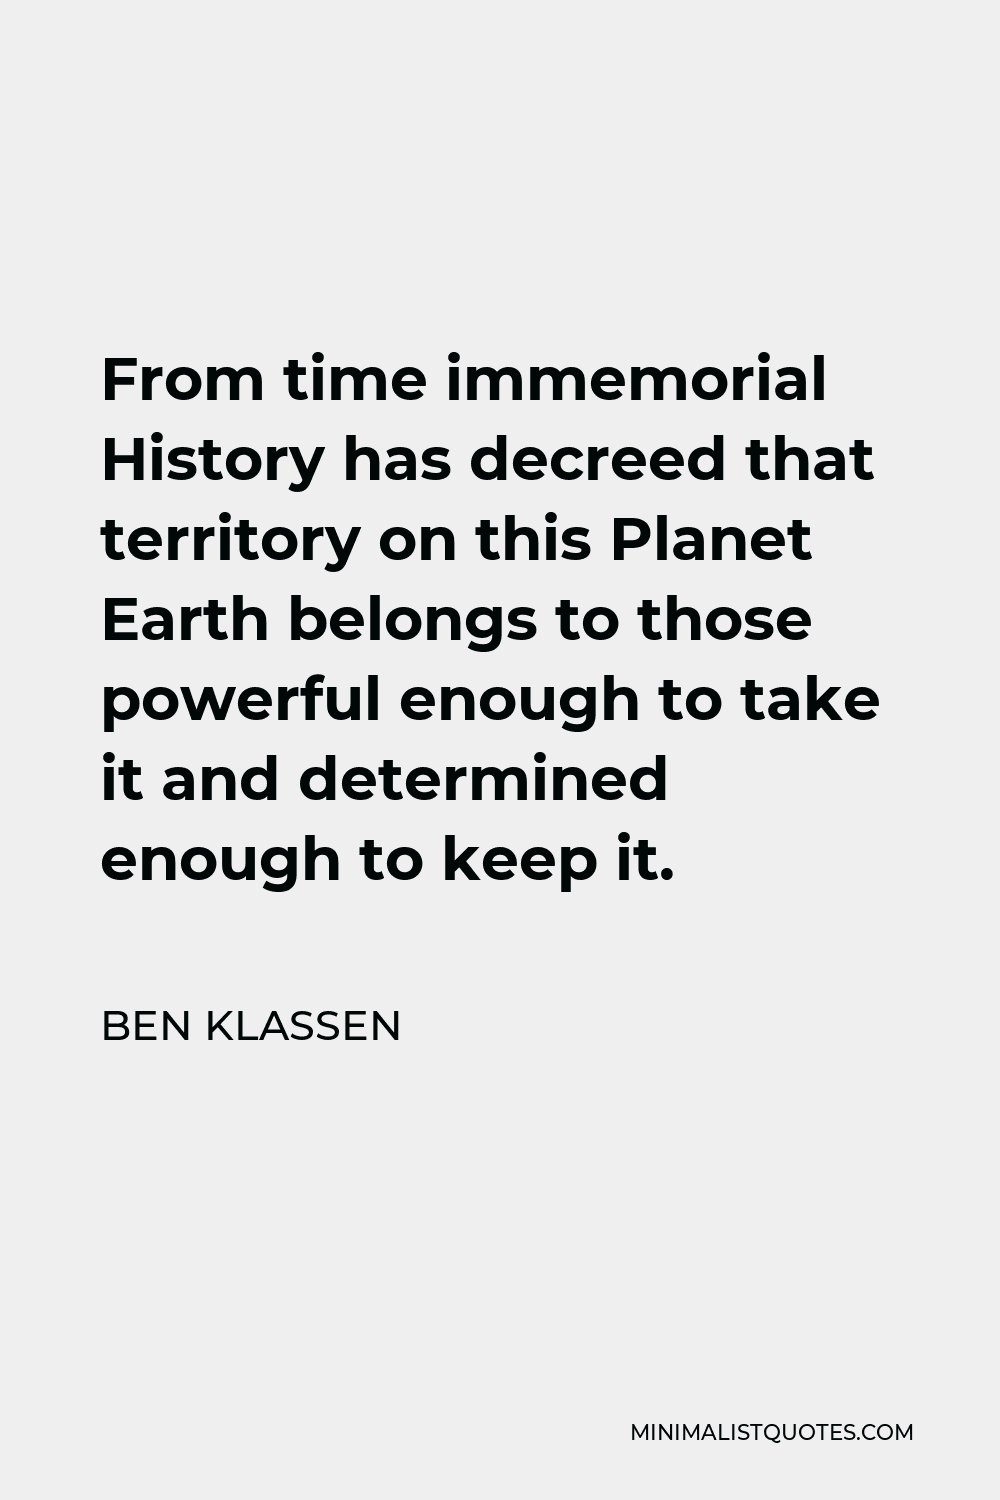 Ben Klassen Quote - From time immemorial History has decreed that territory on this Planet Earth belongs to those powerful enough to take it and determined enough to keep it.